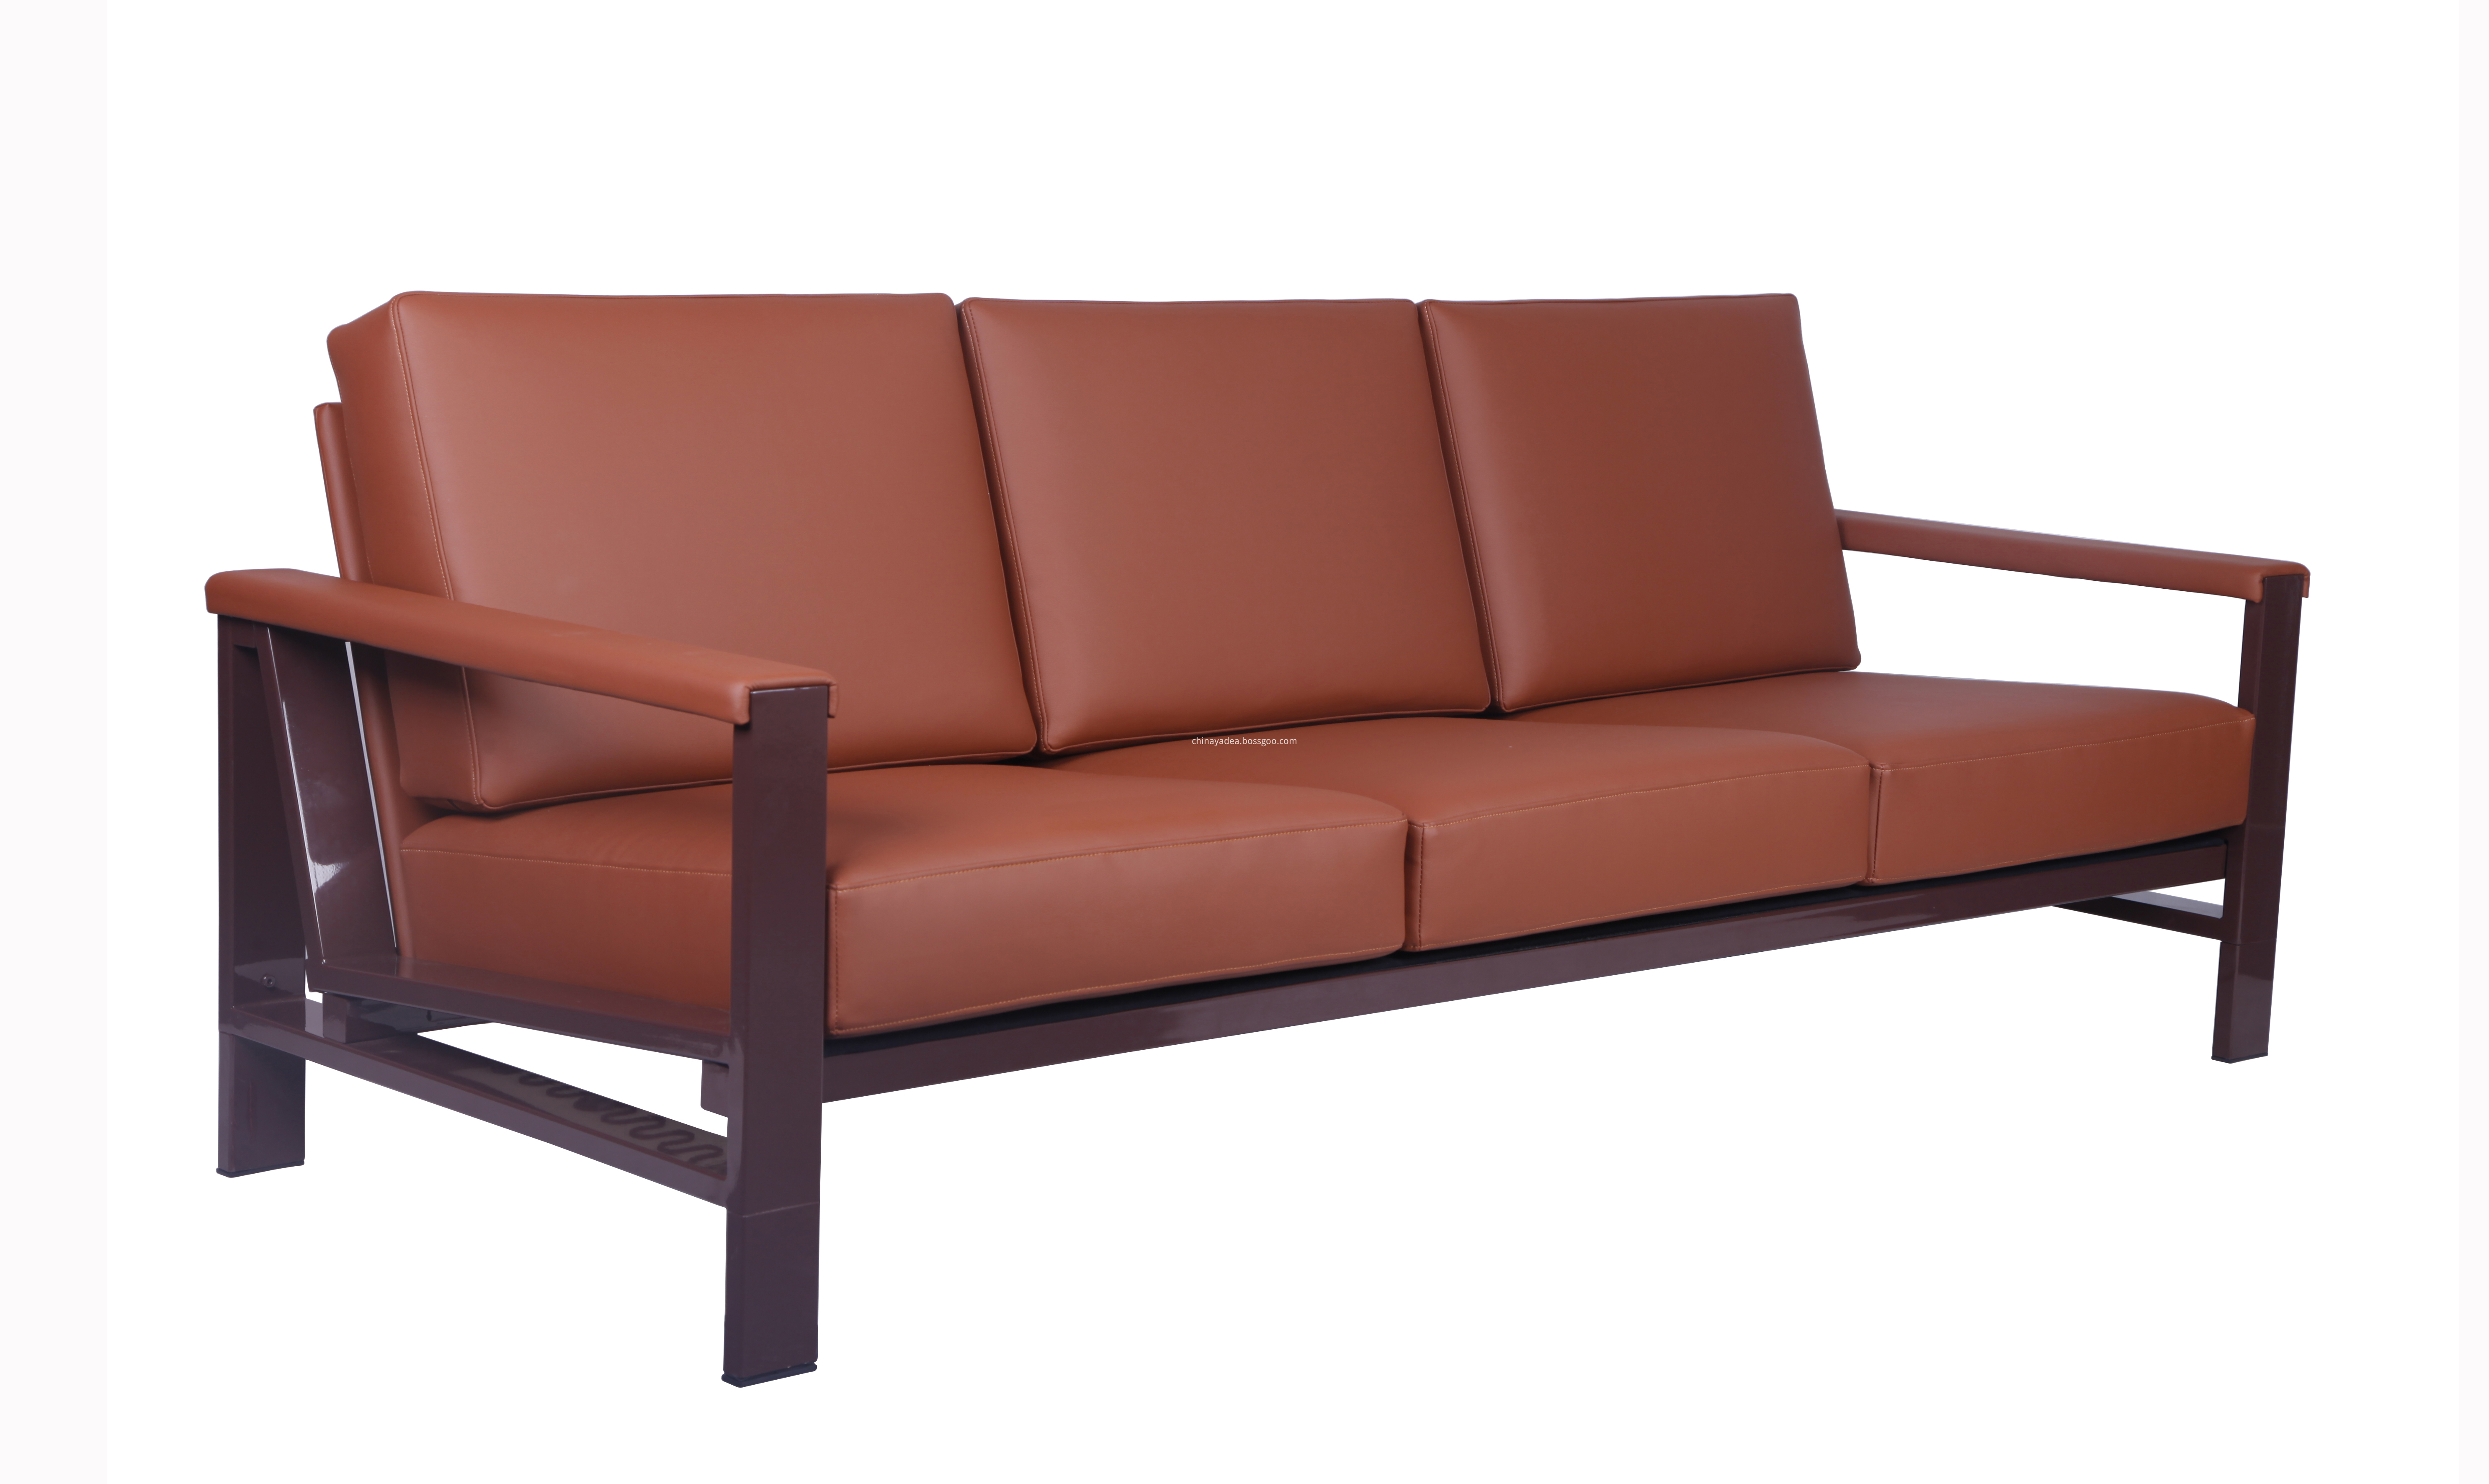 Strong-Metal-Frame-Leather-Sofa-for-Living-Room